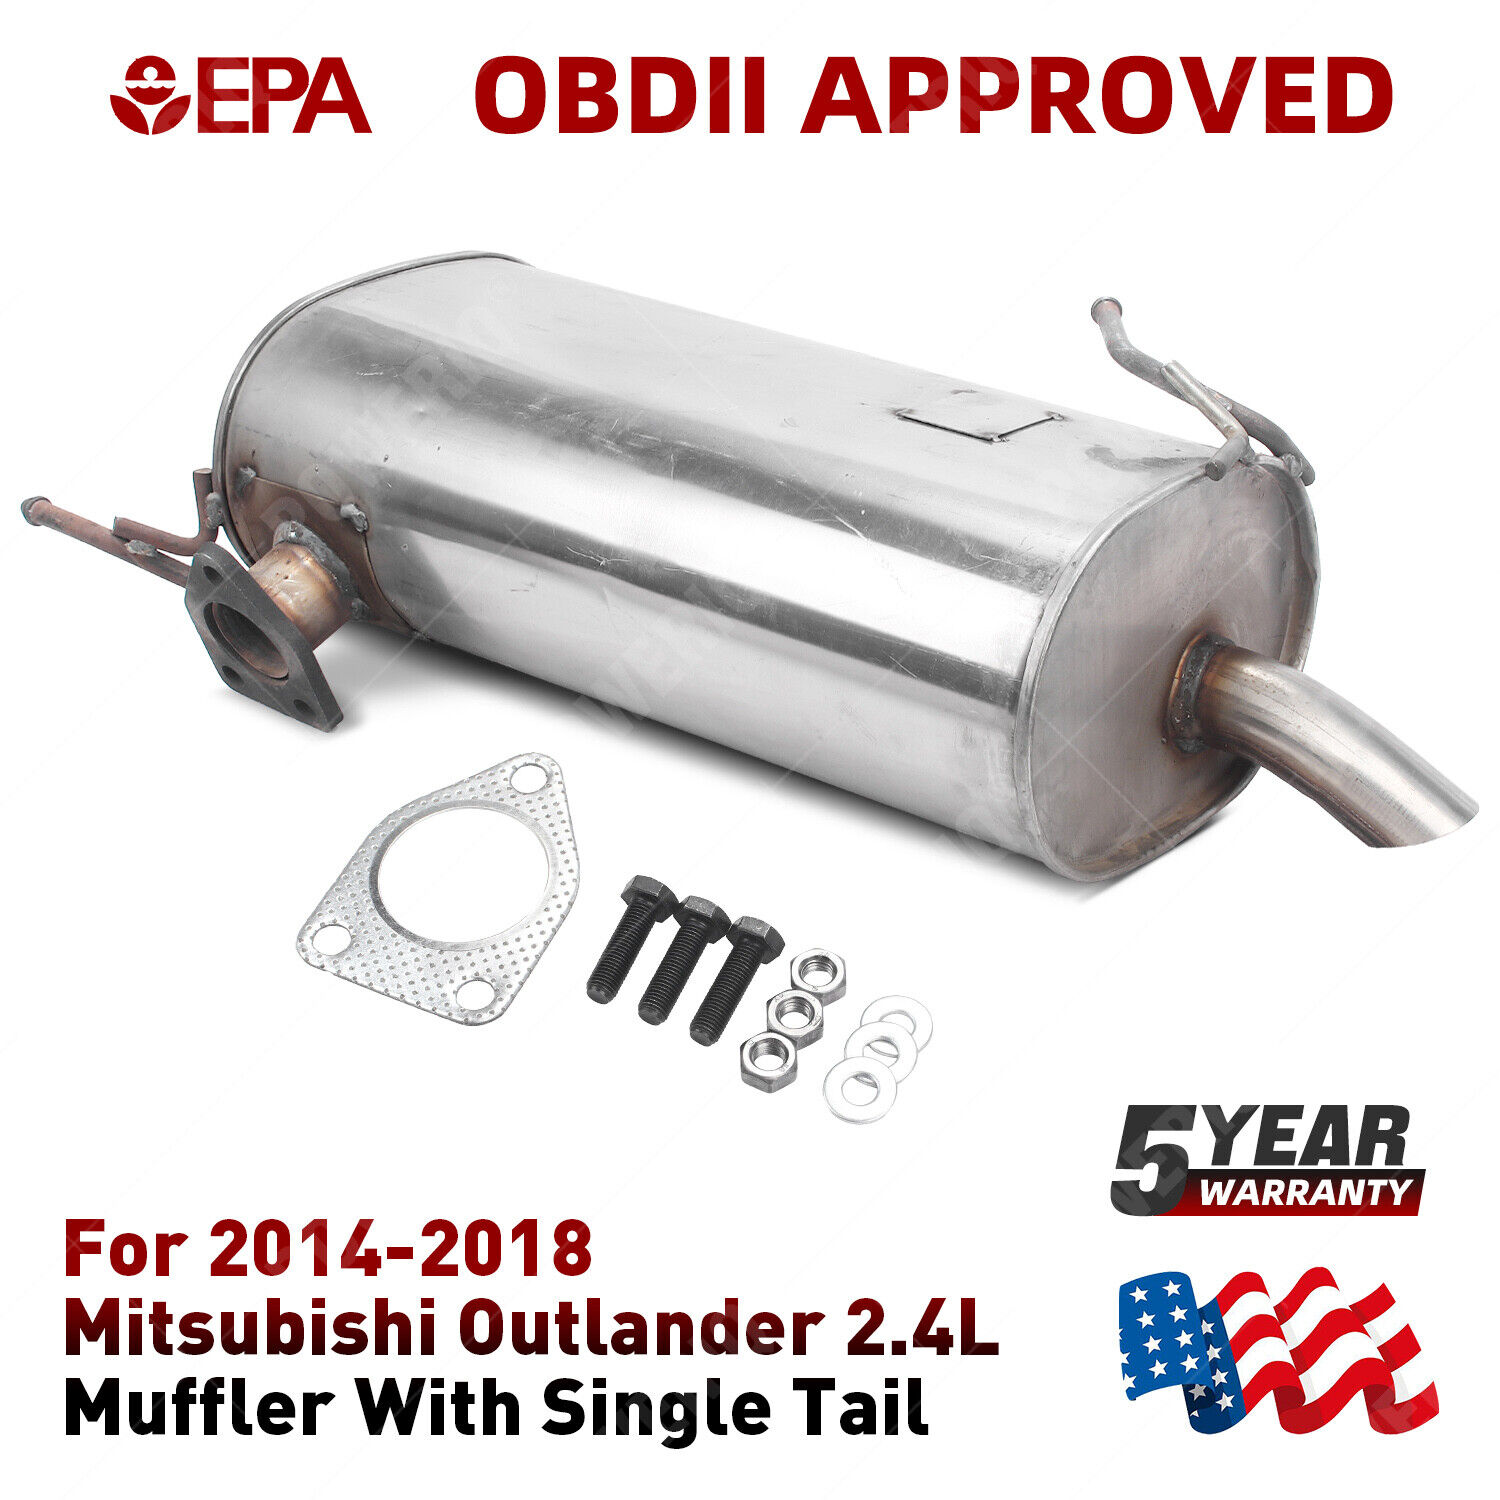 Fits 2014 To 2018 Mitsubishi Outlander 2.4L Muffler (with Single Tail) New USA